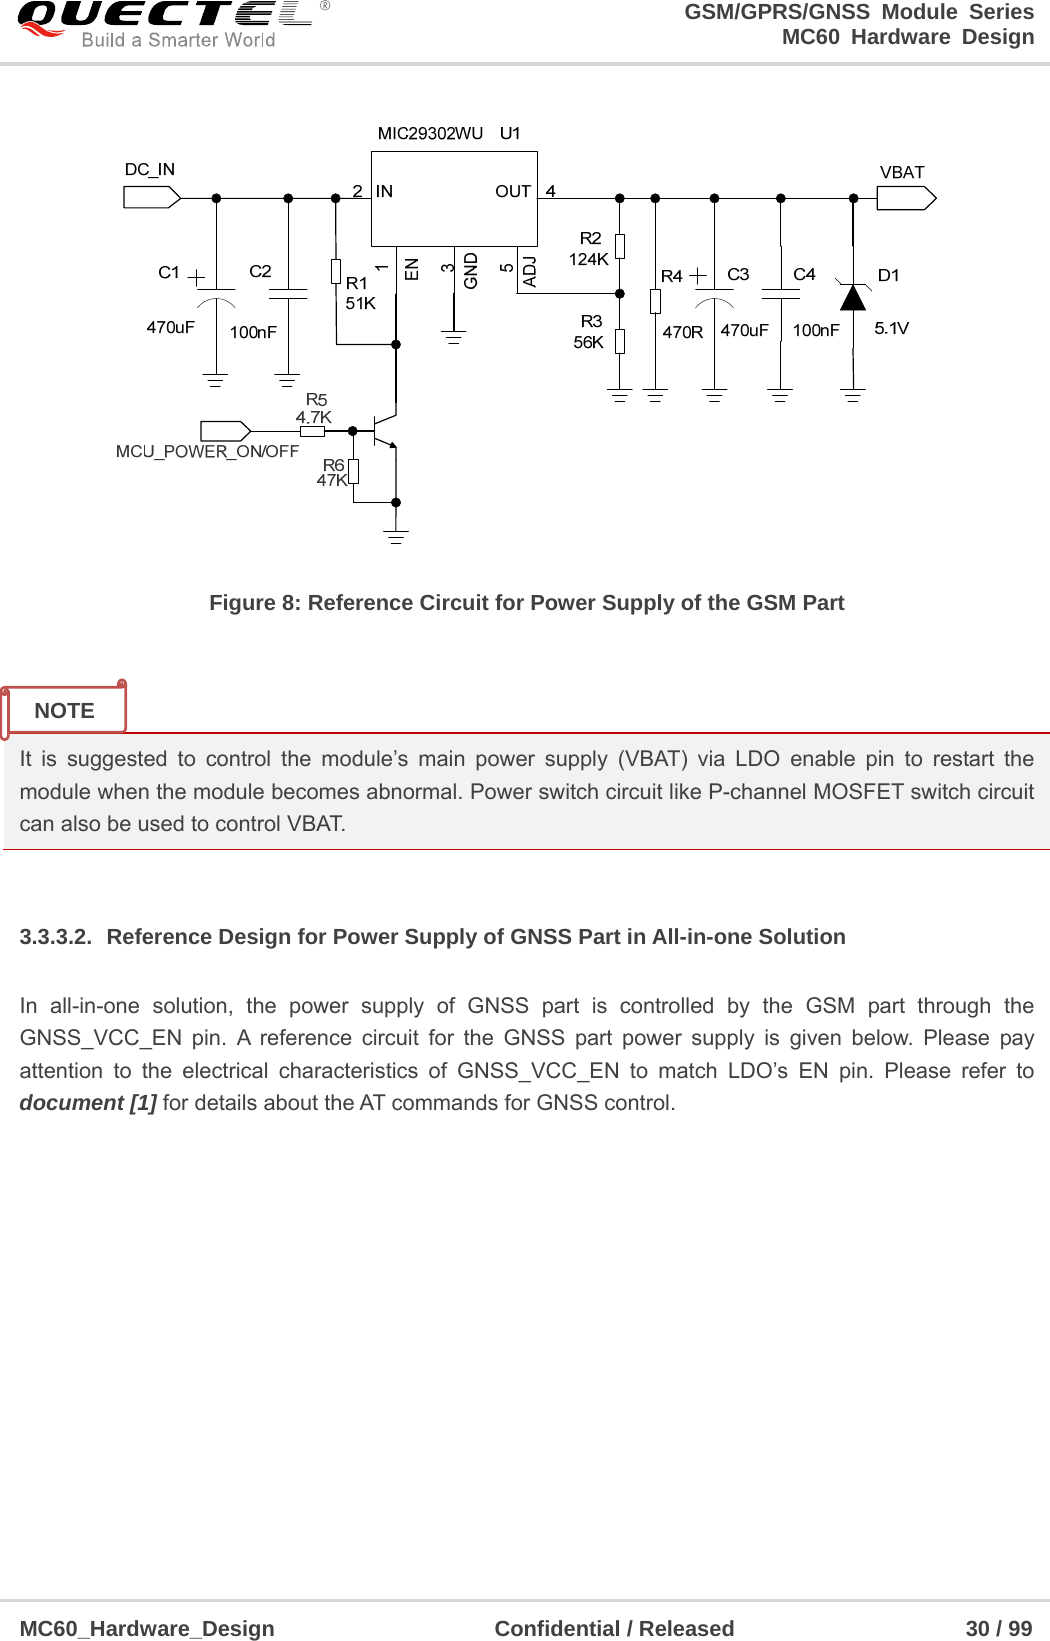                                                                     GSM/GPRS/GNSS Module Series                                                                 MC60 Hardware Design  MC60_Hardware_Design                    Confidential / Released                     30 / 99      Figure 8: Reference Circuit for Power Supply of the GSM Part   It is suggested to control the module’s main power supply (VBAT) via LDO enable pin to restart the module when the module becomes abnormal. Power switch circuit like P-channel MOSFET switch circuit can also be used to control VBAT.  3.3.3.2.  Reference Design for Power Supply of GNSS Part in All-in-one Solution In all-in-one solution, the power supply of GNSS part is controlled by the GSM part through the GNSS_VCC_EN pin. A reference circuit for the GNSS part power supply is given below. Please pay attention to the electrical characteristics of GNSS_VCC_EN to match LDO’s EN pin. Please refer to document [1] for details about the AT commands for GNSS control. NOTE 